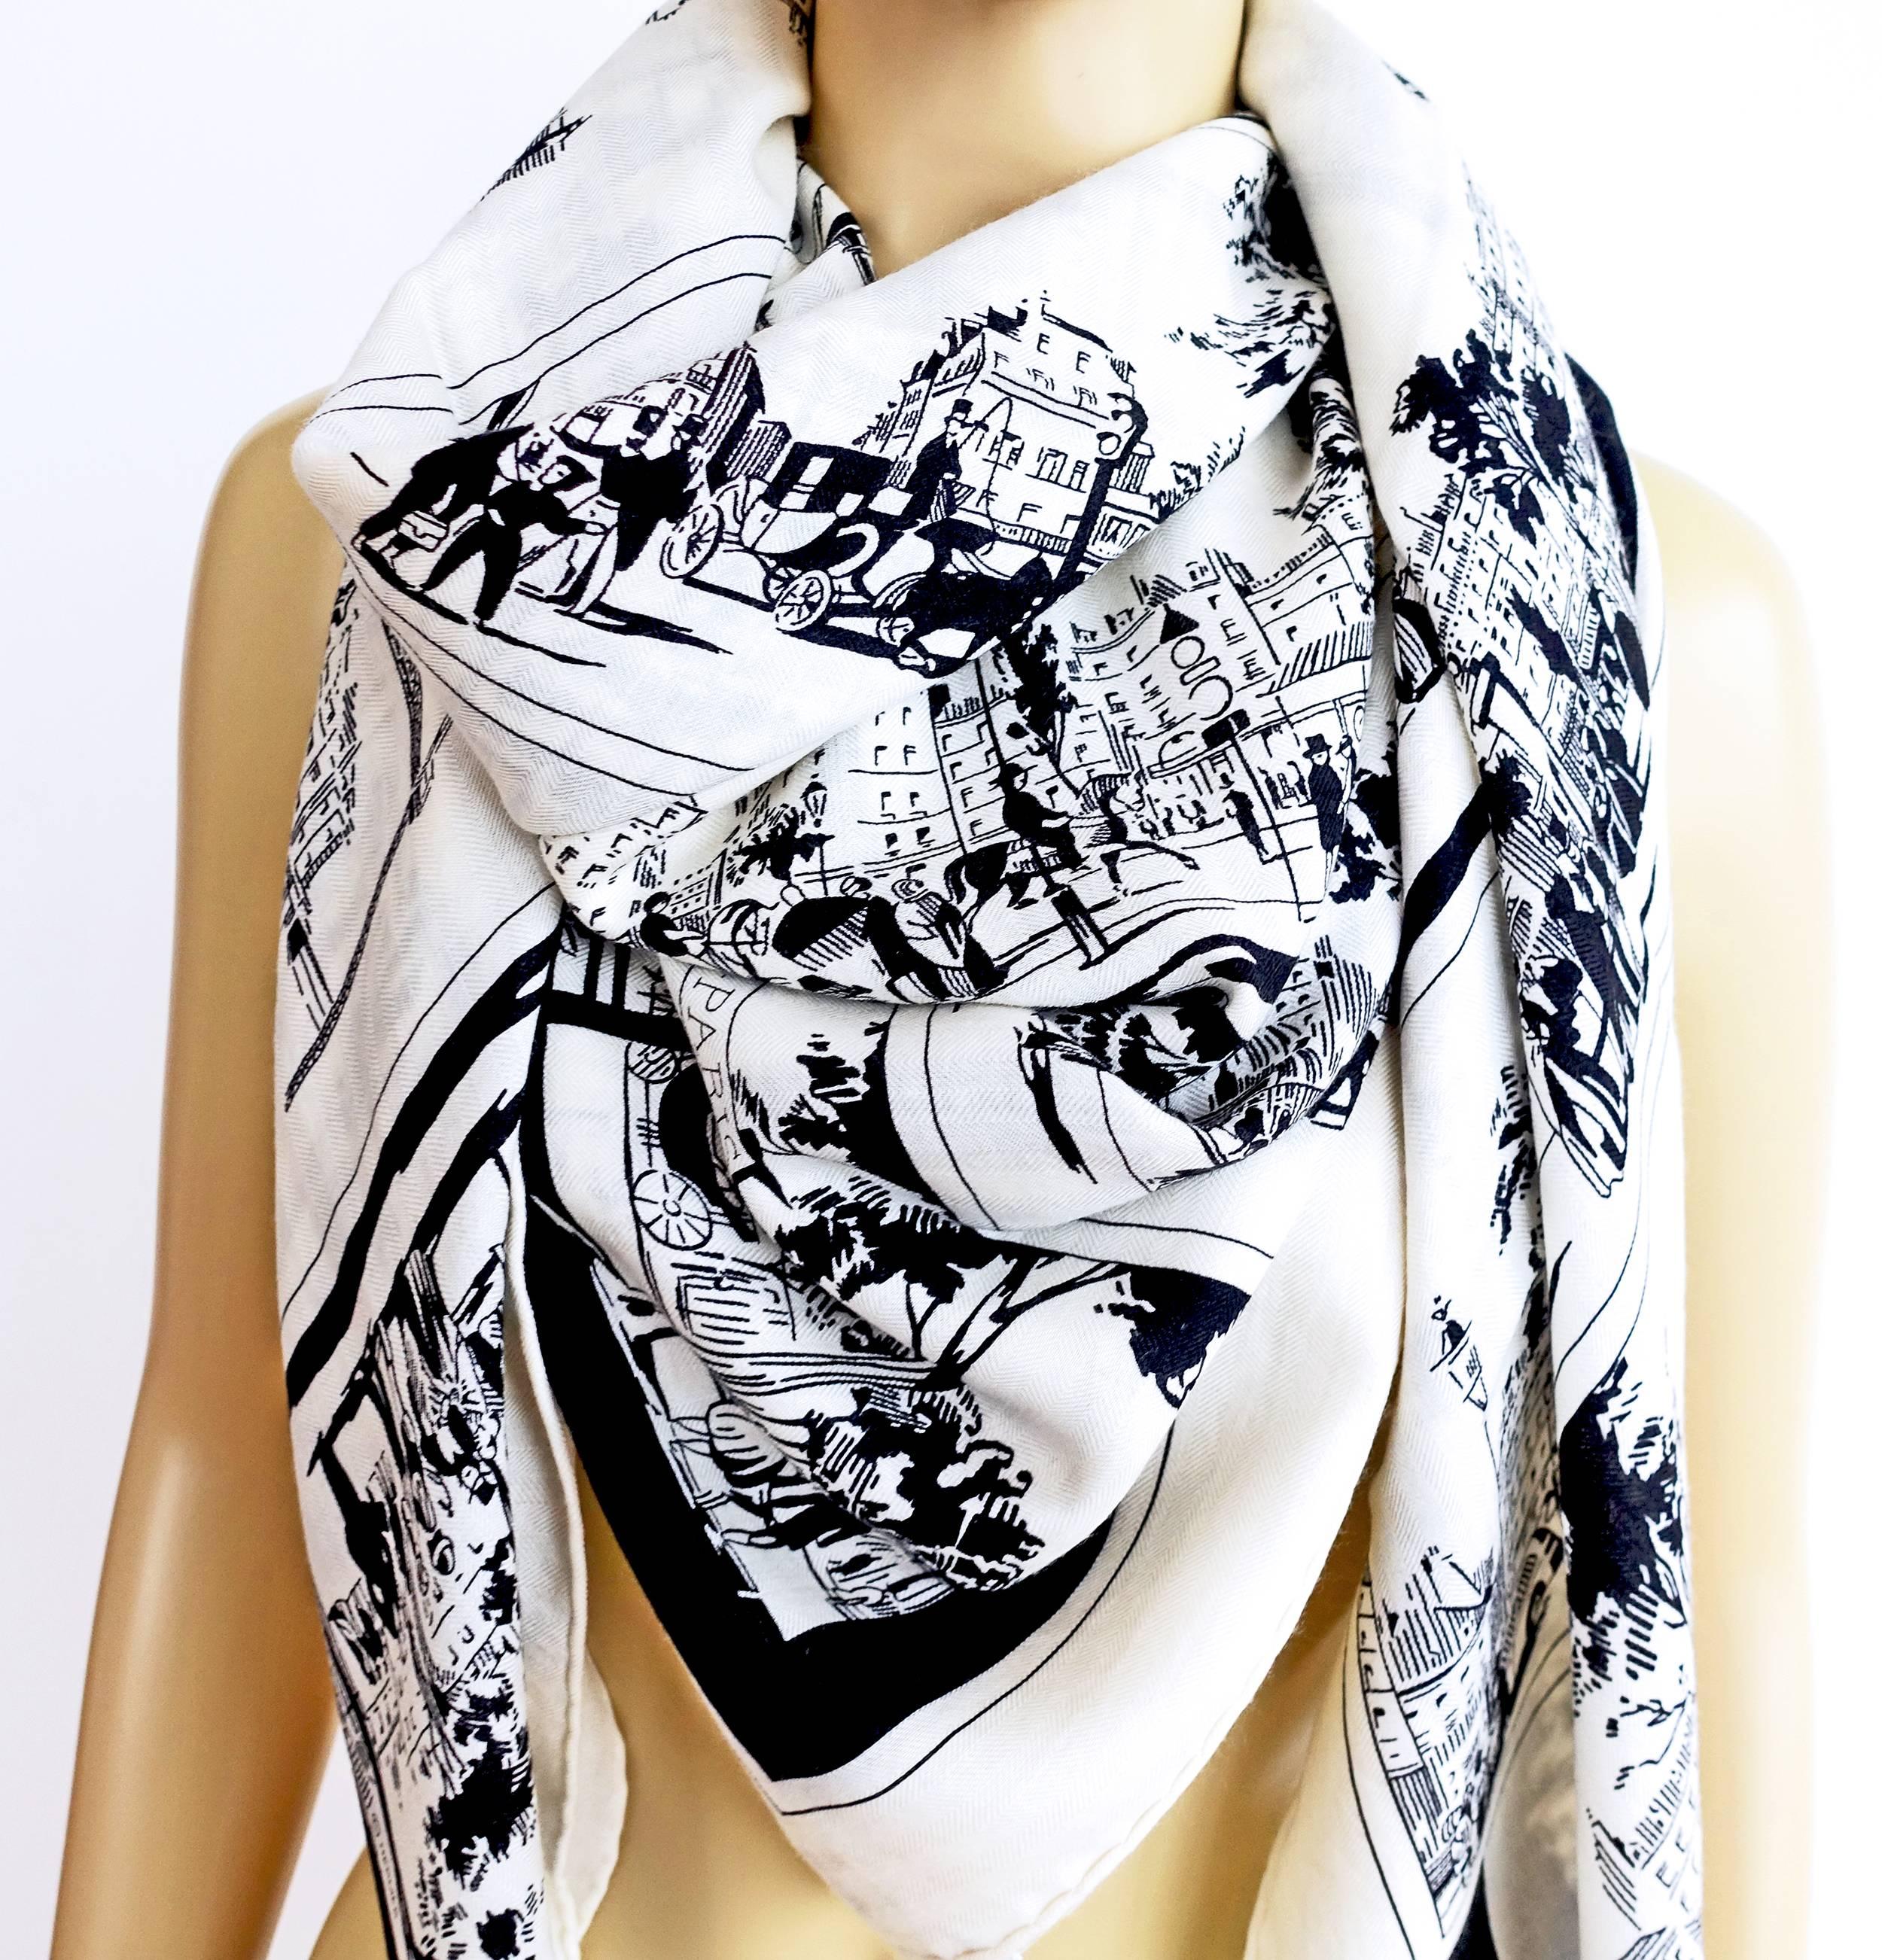 Store fresh. Pristine condition. 
Perfect gift- comes full set with signature orange Hermes box and ribbon
Hands down the most elusive cashmere shawl of Fall/Winter 2015
A masterpiece executed in a sublime white and black coloration
Designed by